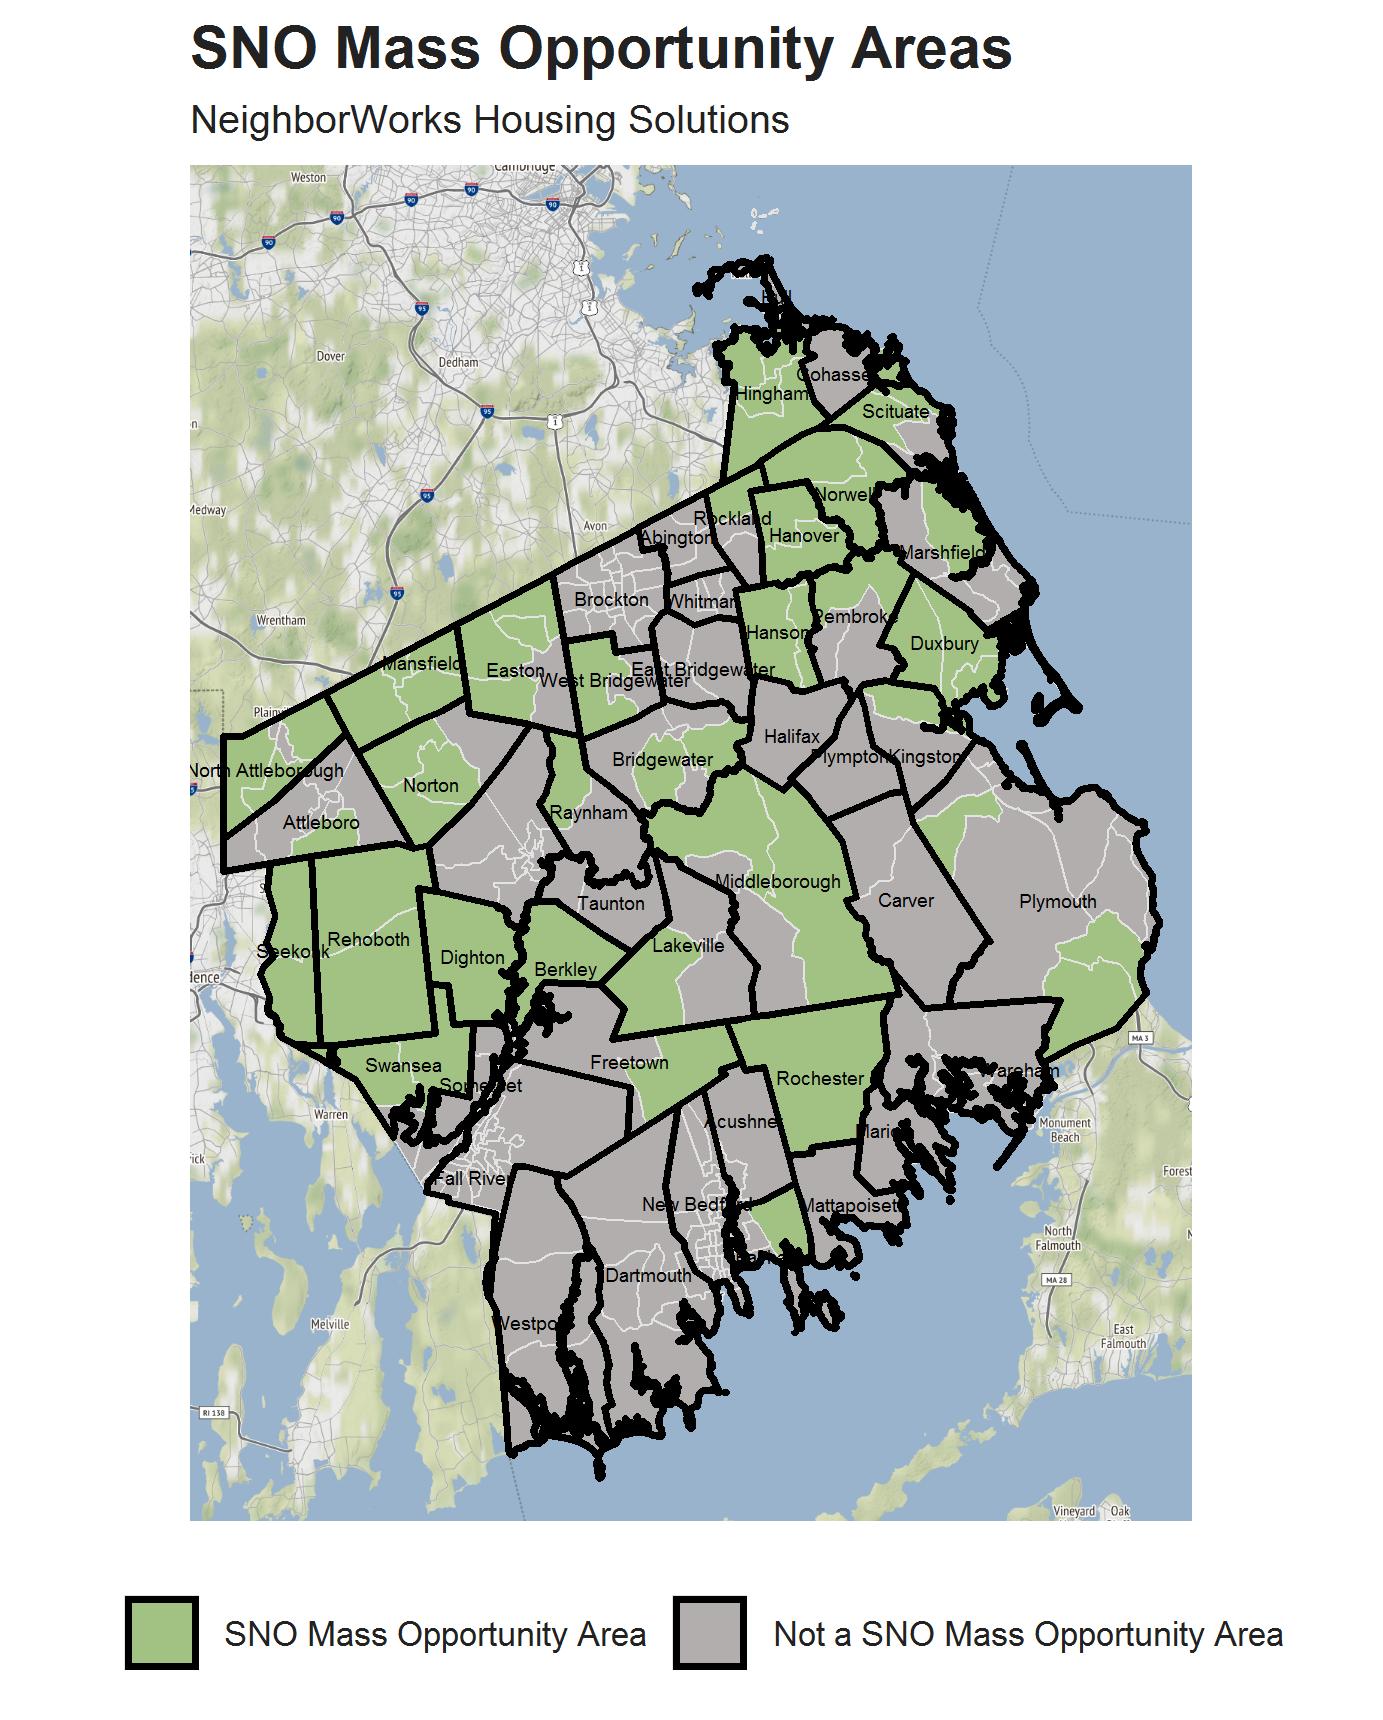 SNO Mass Map of the South Shore that highlights opportunity areas within the region